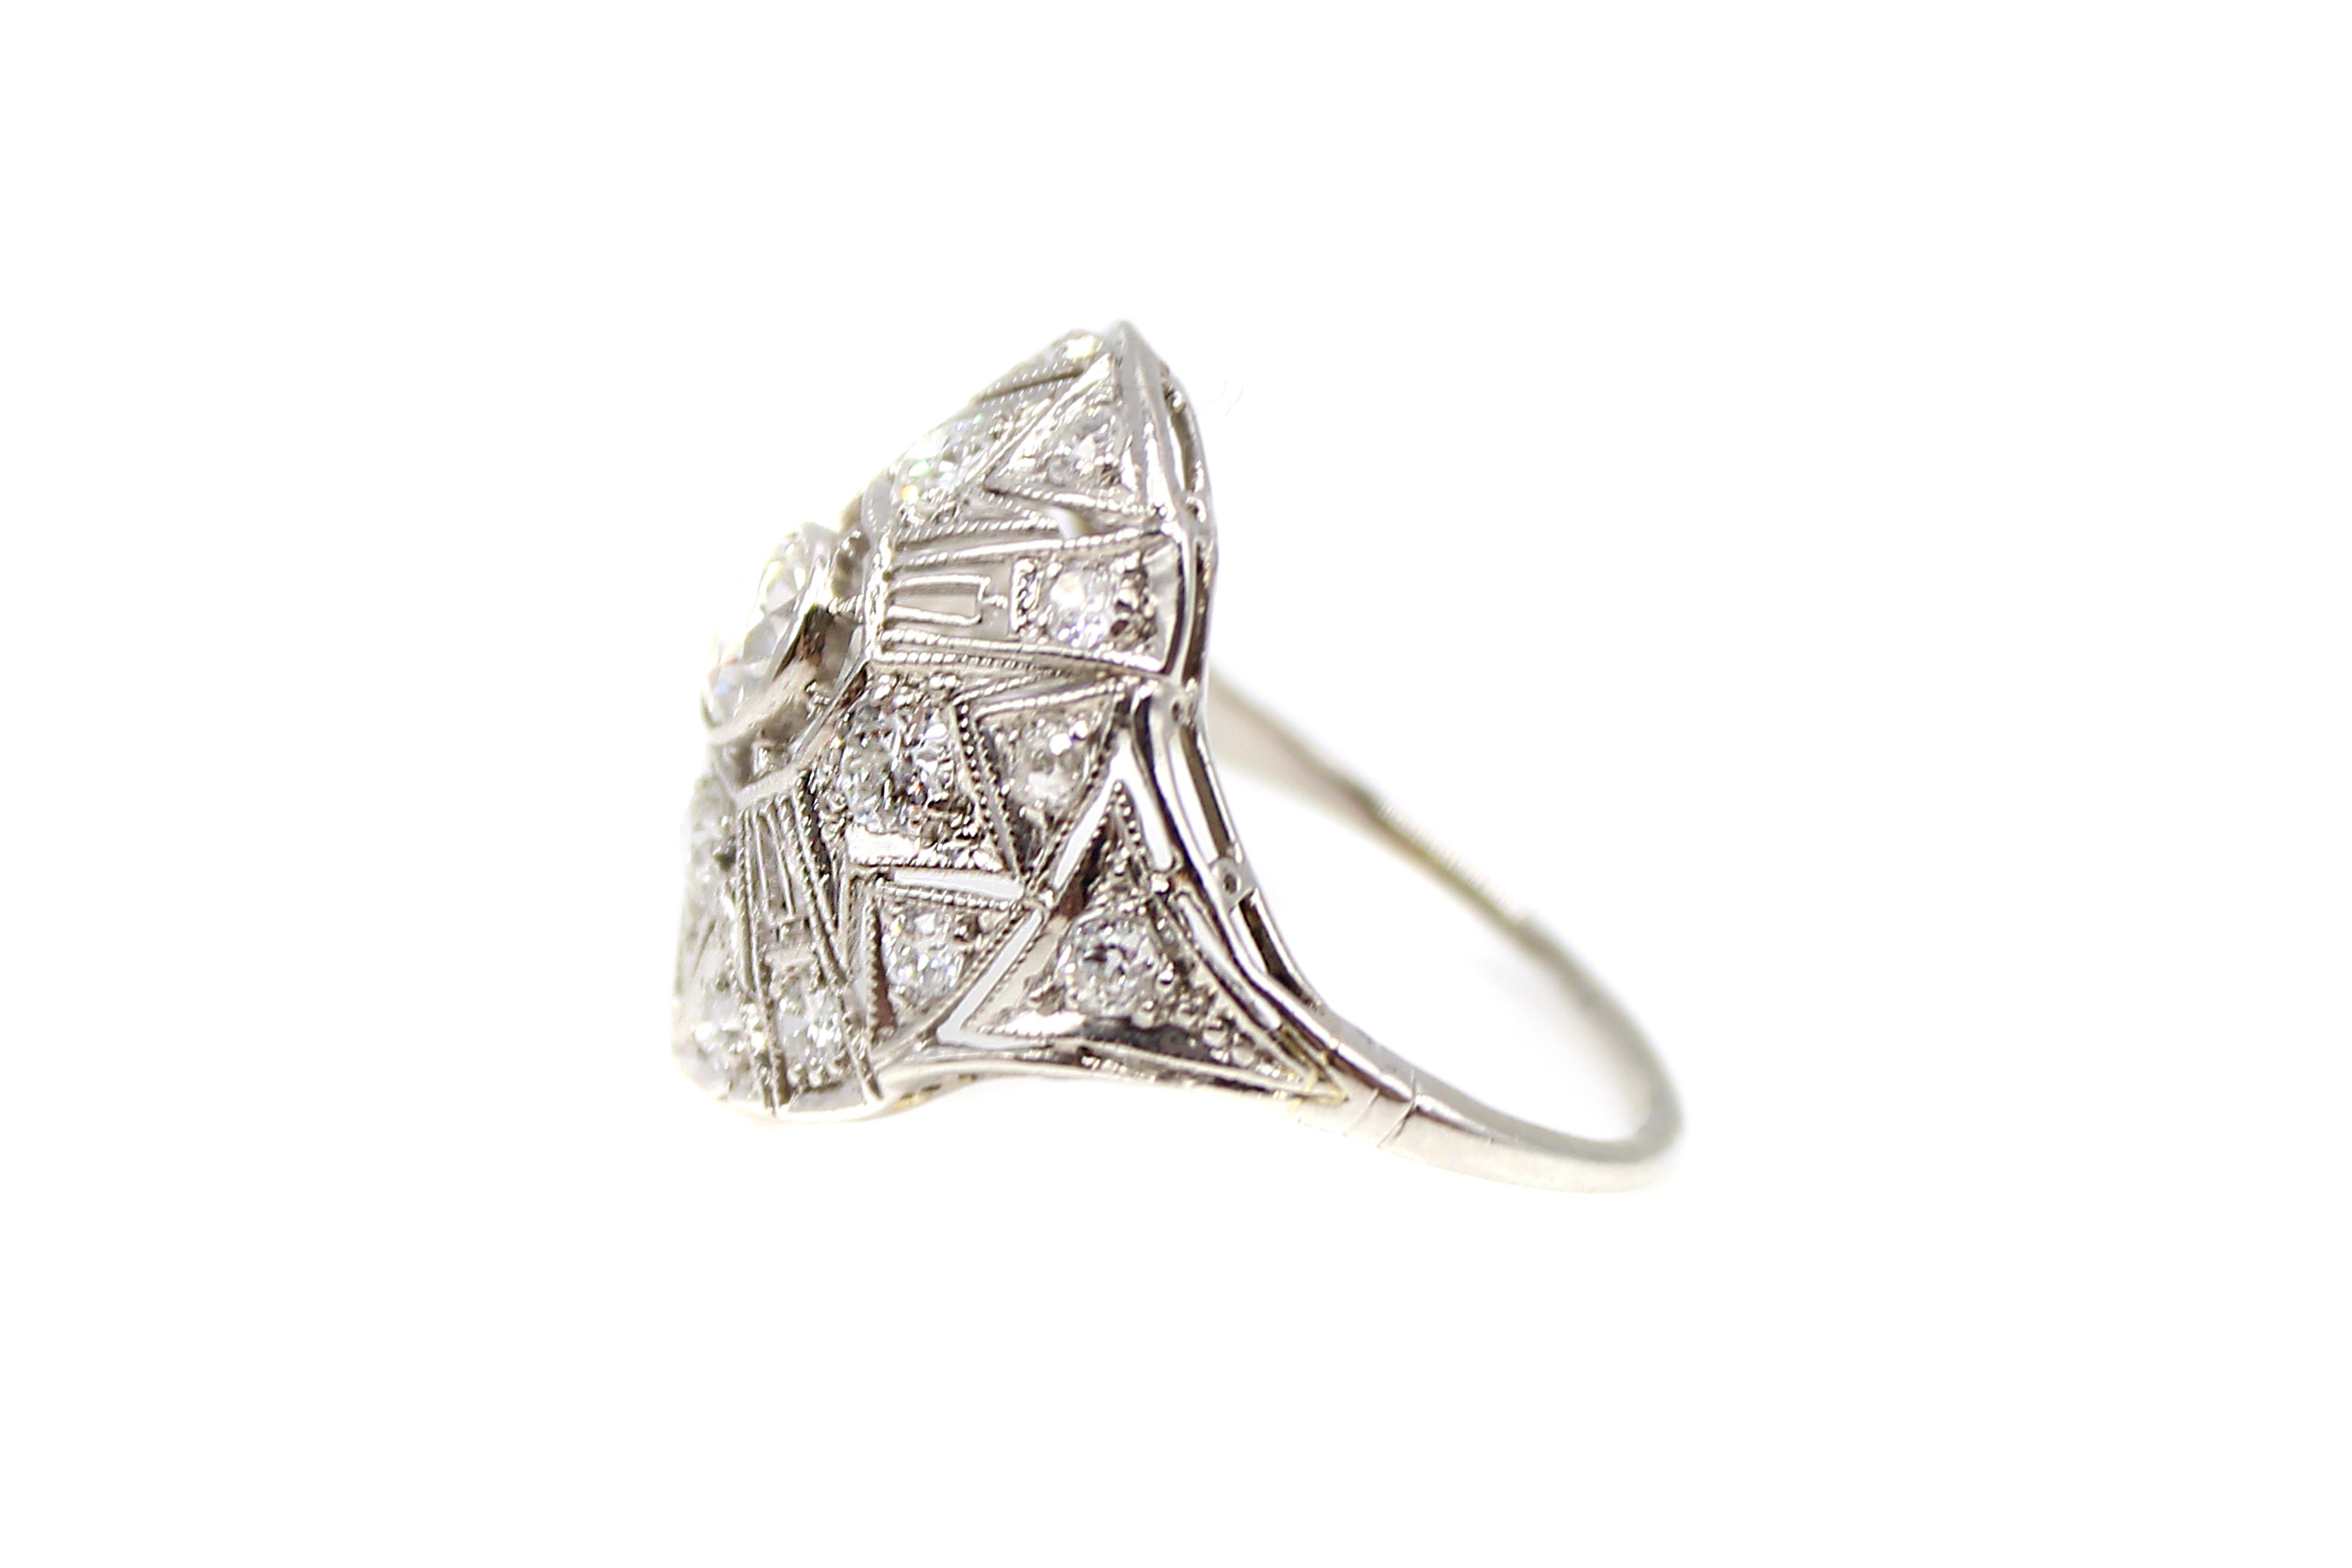 Gorgeous Art Deco platinum diamond ring centrally set with an Old European cut diamond weighing approximately 0.50 carats. The center diamond is embellished by 18 smaller bright white Old European cut  diamonds set in between beautiful azur work in